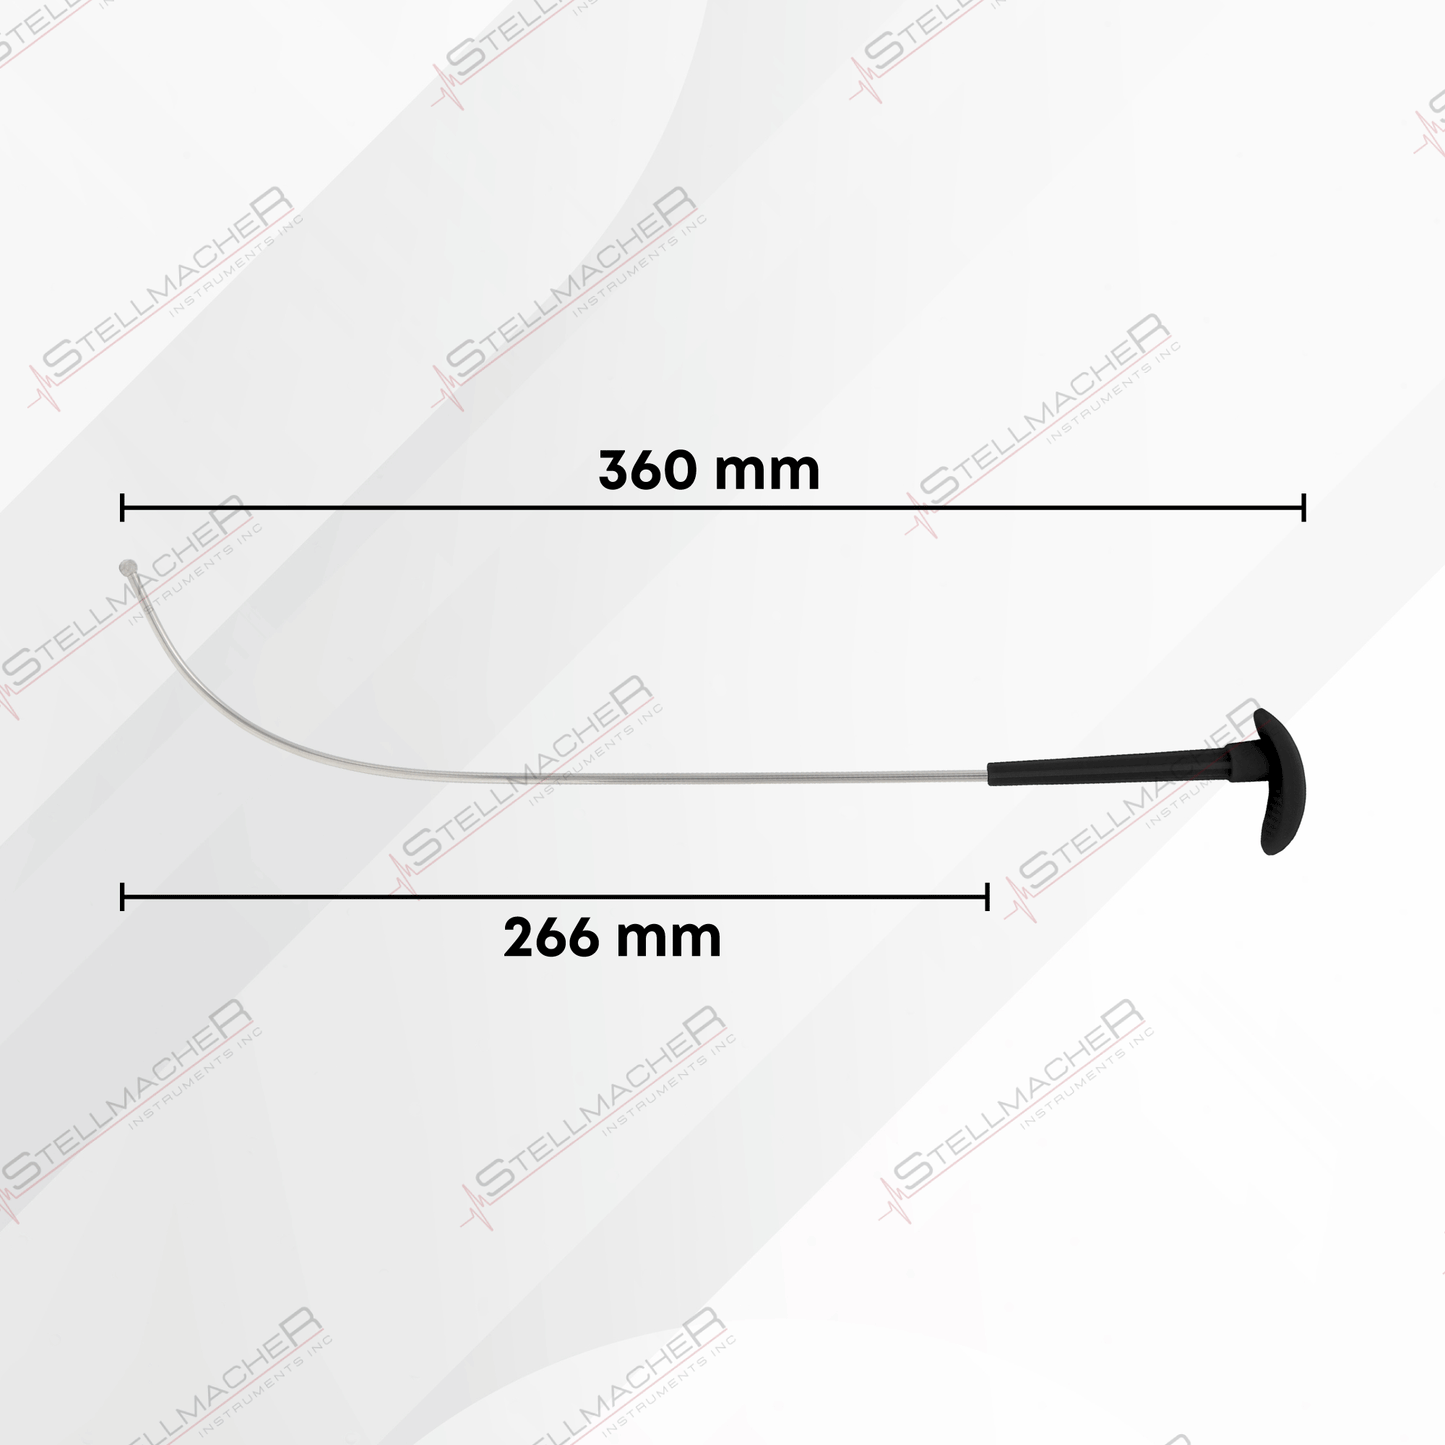 Reusable Intubation Stylet - 12.5" (31.7cm)